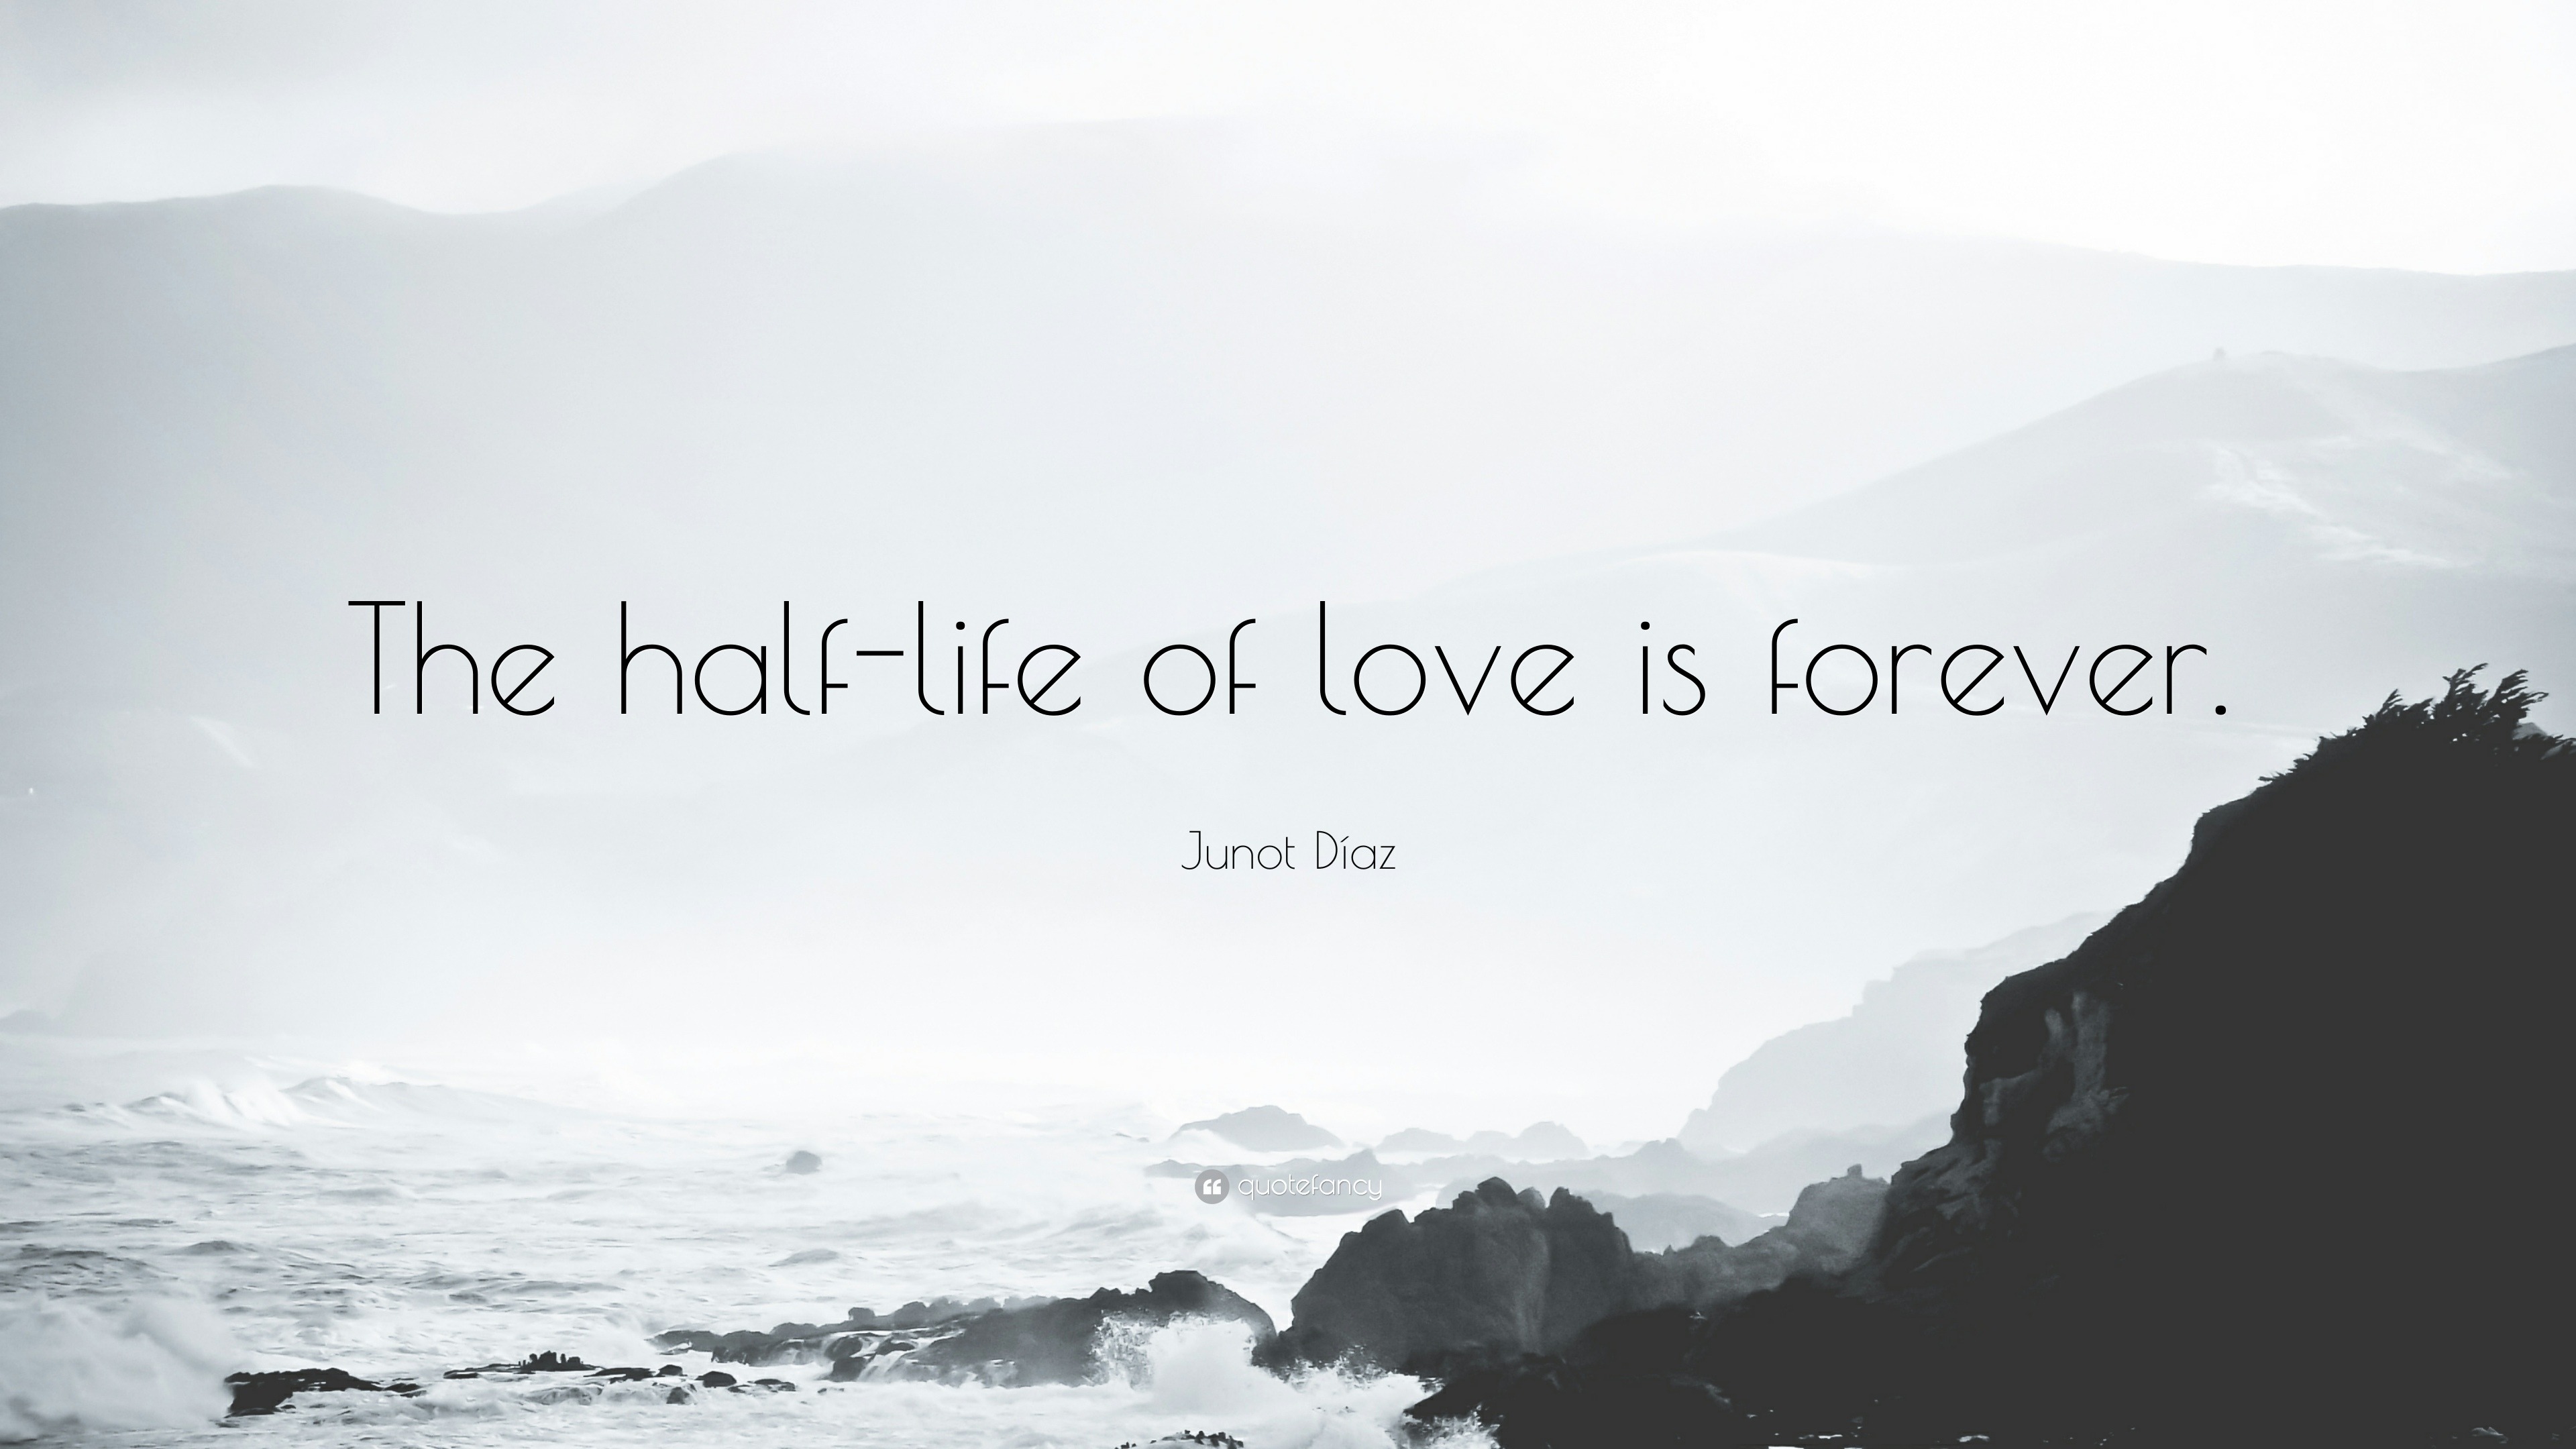 Inspirational Quote The Half Life Of Love Is Forever Minimalist Wall Art Typography Poster FREE POSTER WITH EVERY ORDER Literary Quote Print JUNOT DIAZ 